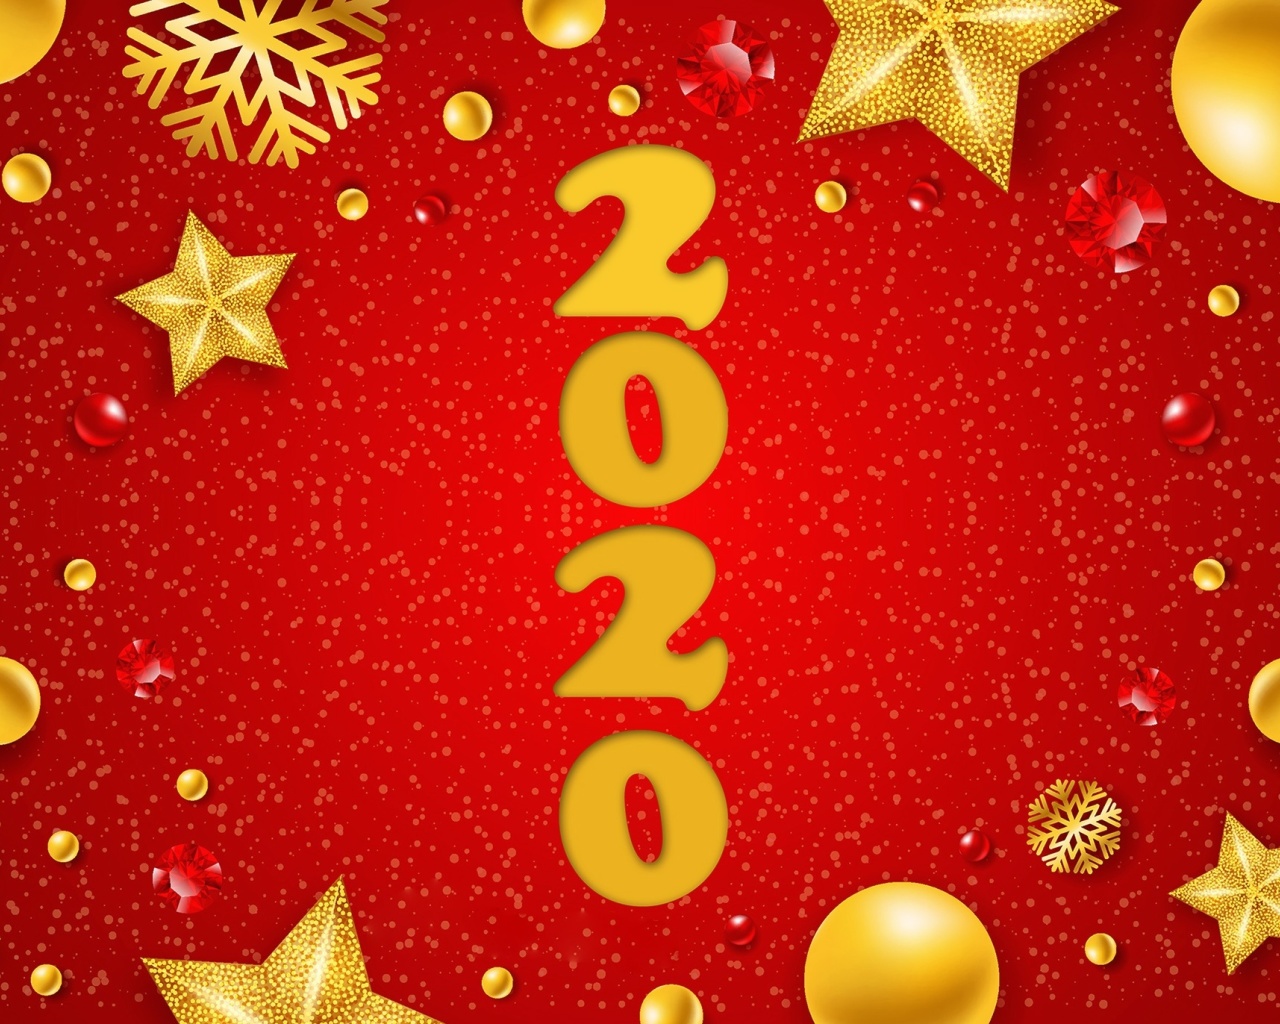 Happy New Year 2020 Messages wallpaper 1280x1024